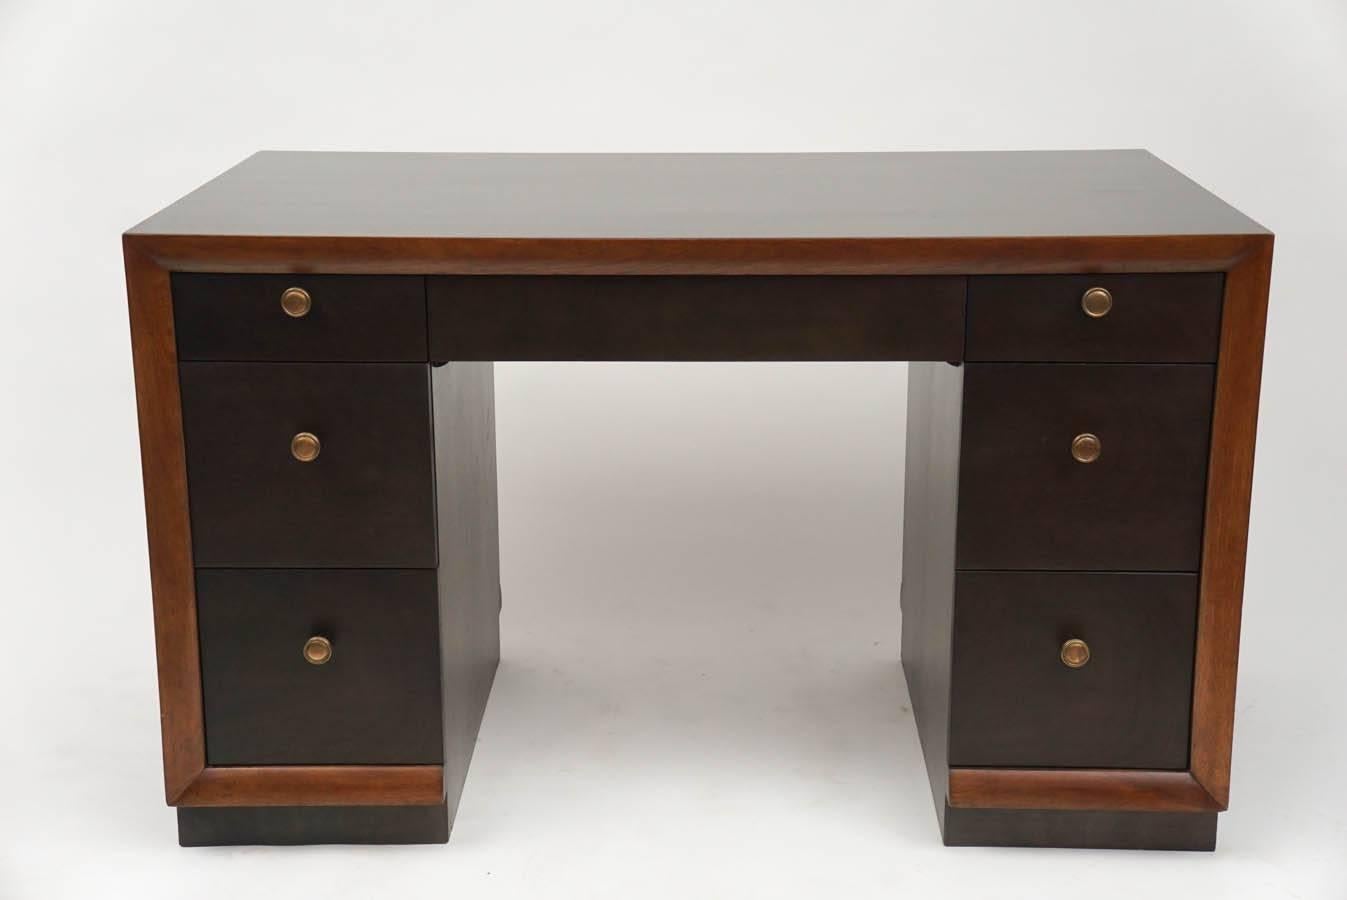 Kneehole desk by T.H. Robsjohn-Gibbings. It has three drawers on each and a center drawer above the kneehole. Produced by Widdicomb. It's missing the original ring pulls but still possesses wonderful style. Vintage condition.